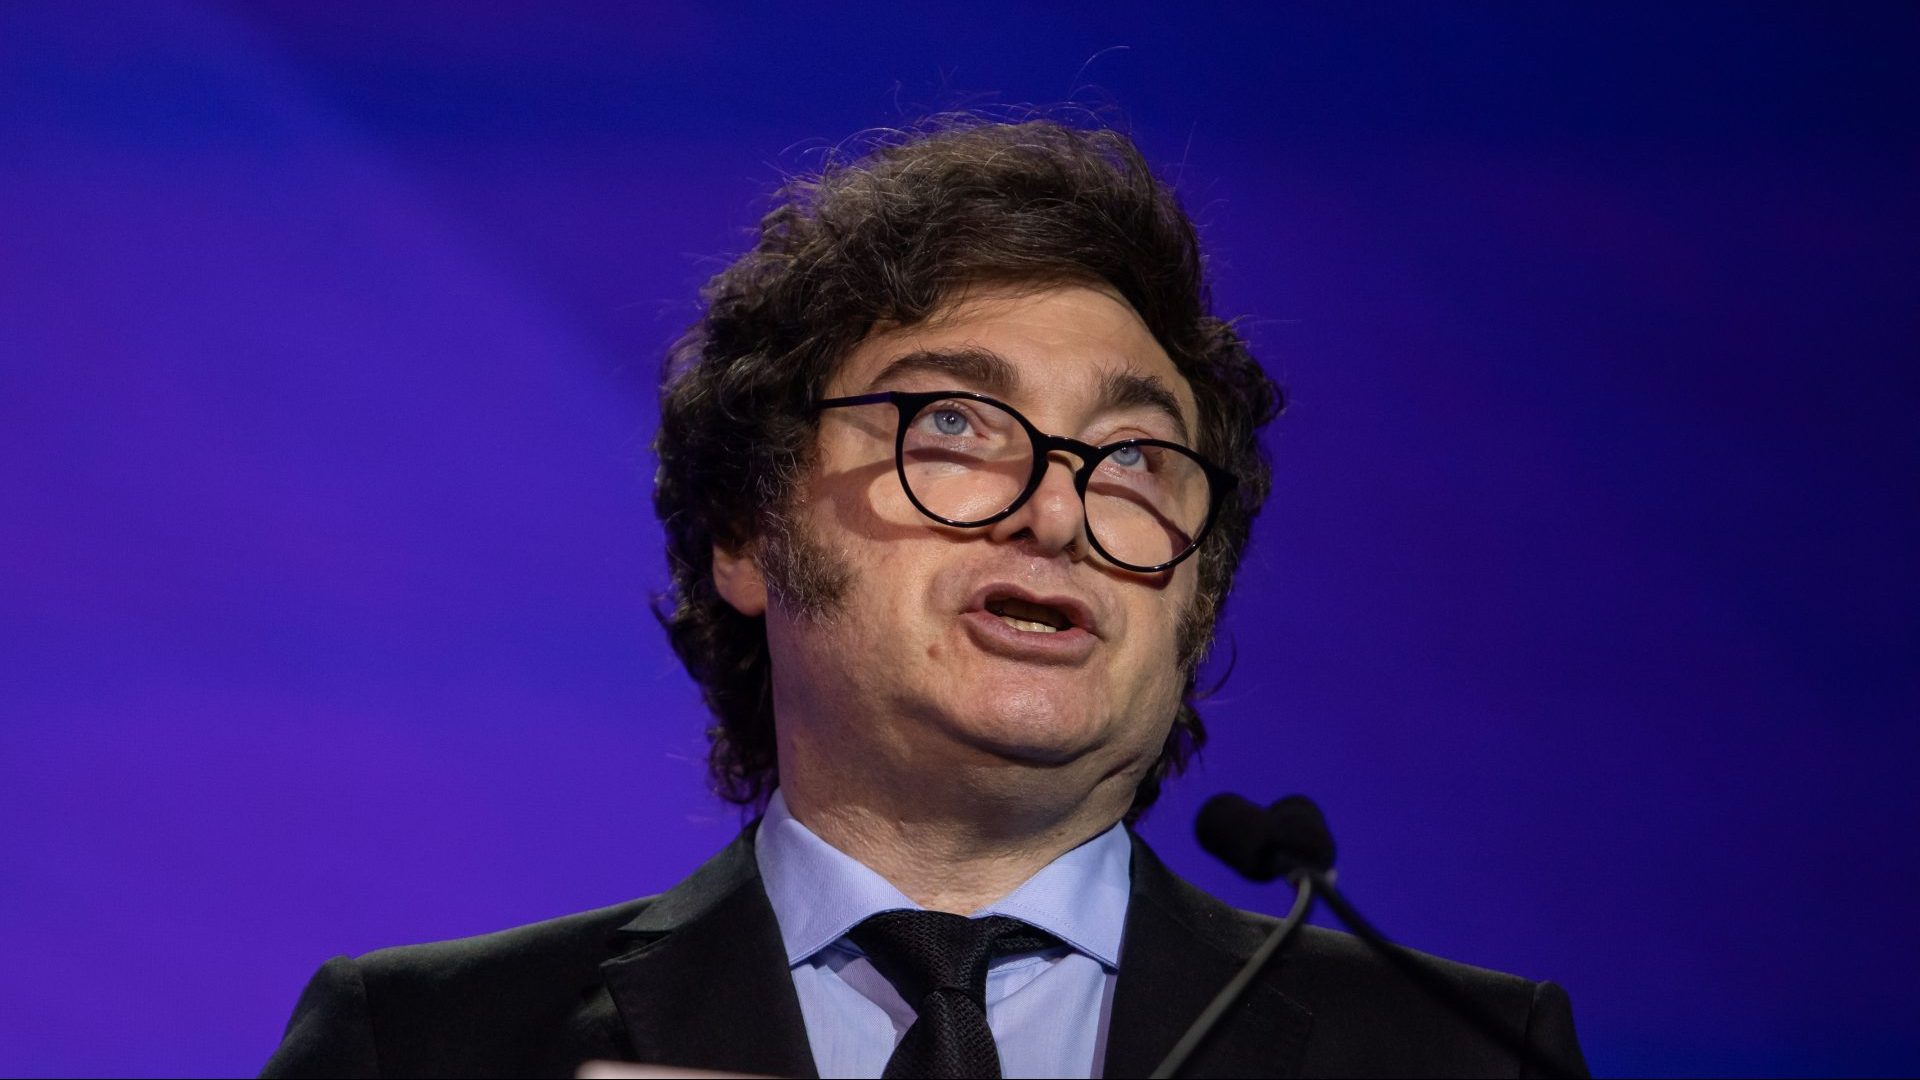 Javier Milei speaks at the Milken Institute's Global Conference in California (Photo by Apu Gomes/Getty Images)